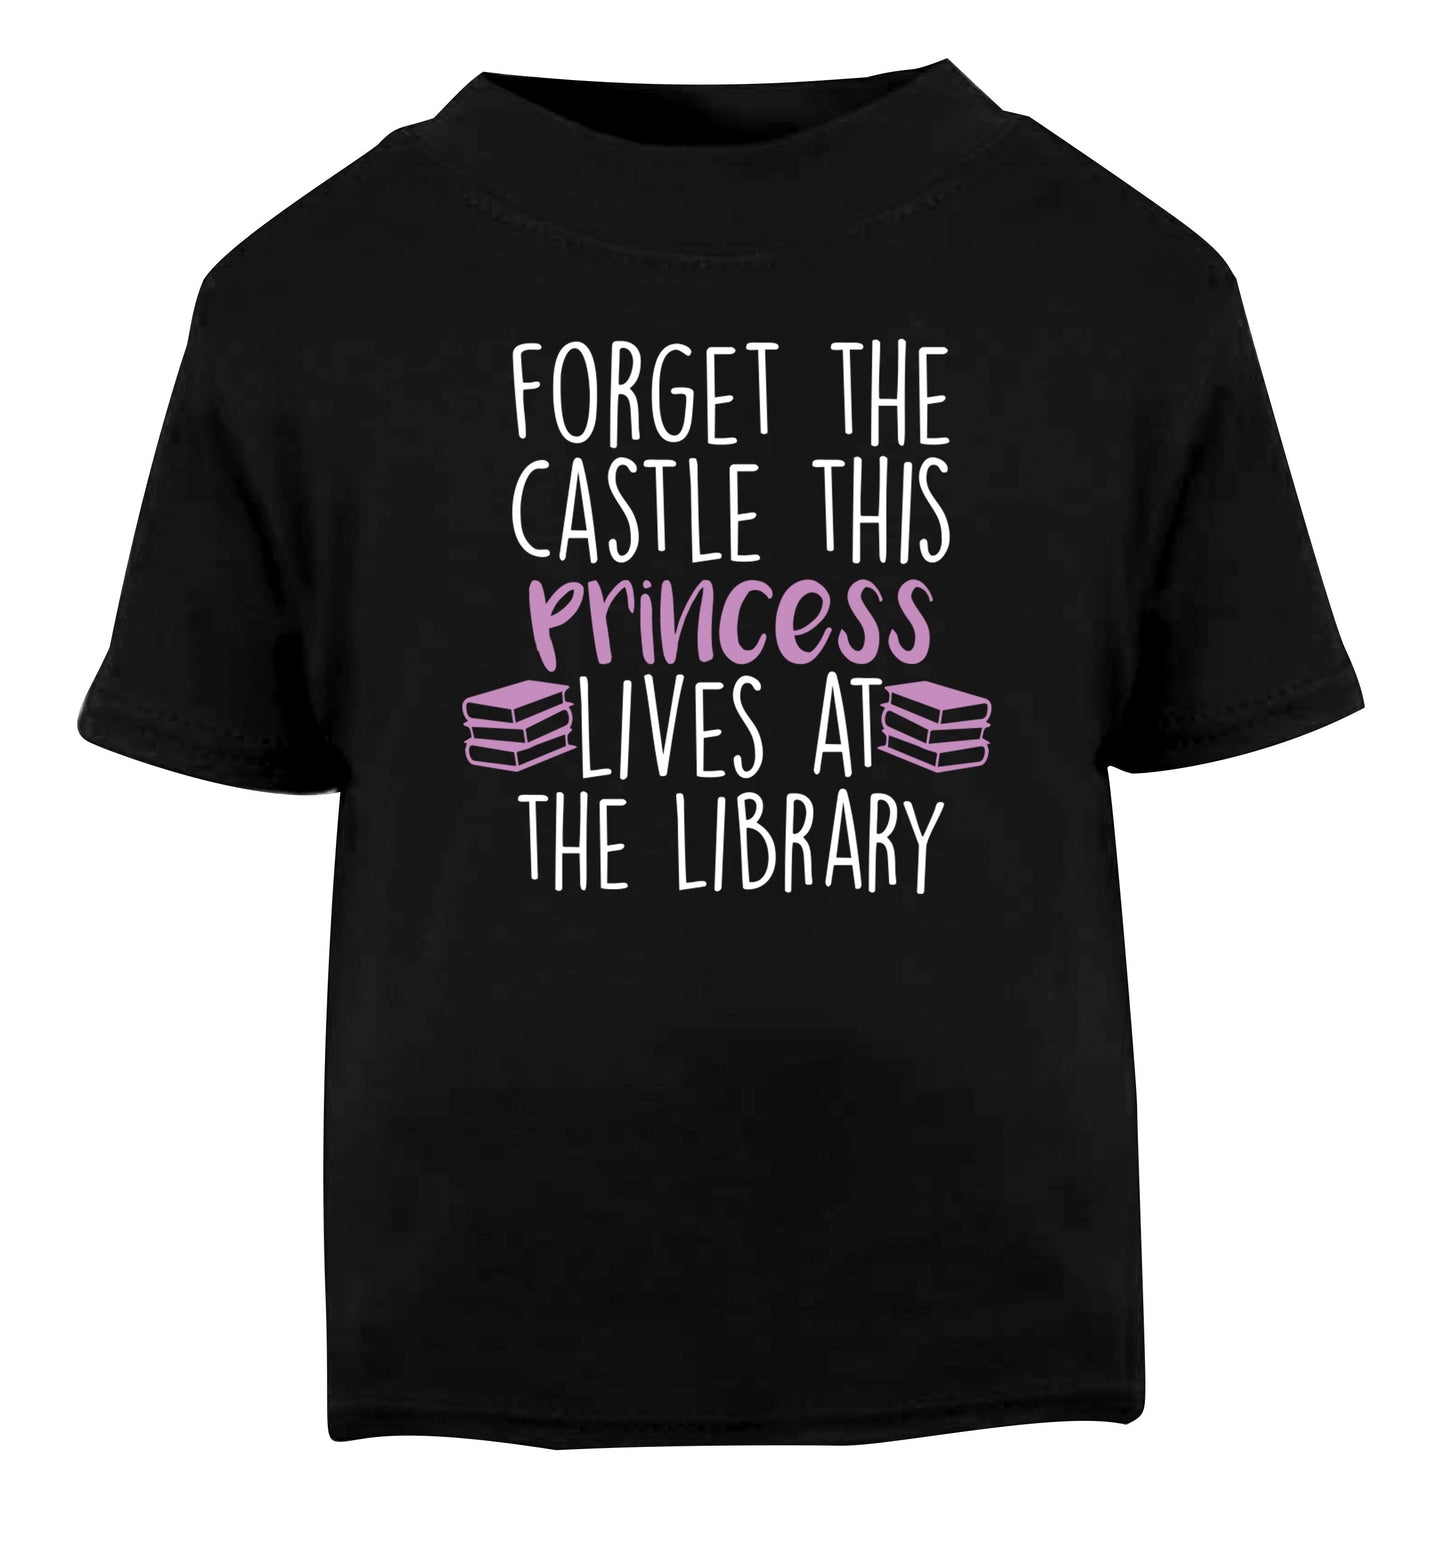 Forget the castle this princess lives at the library Black Baby Toddler Tshirt 2 years